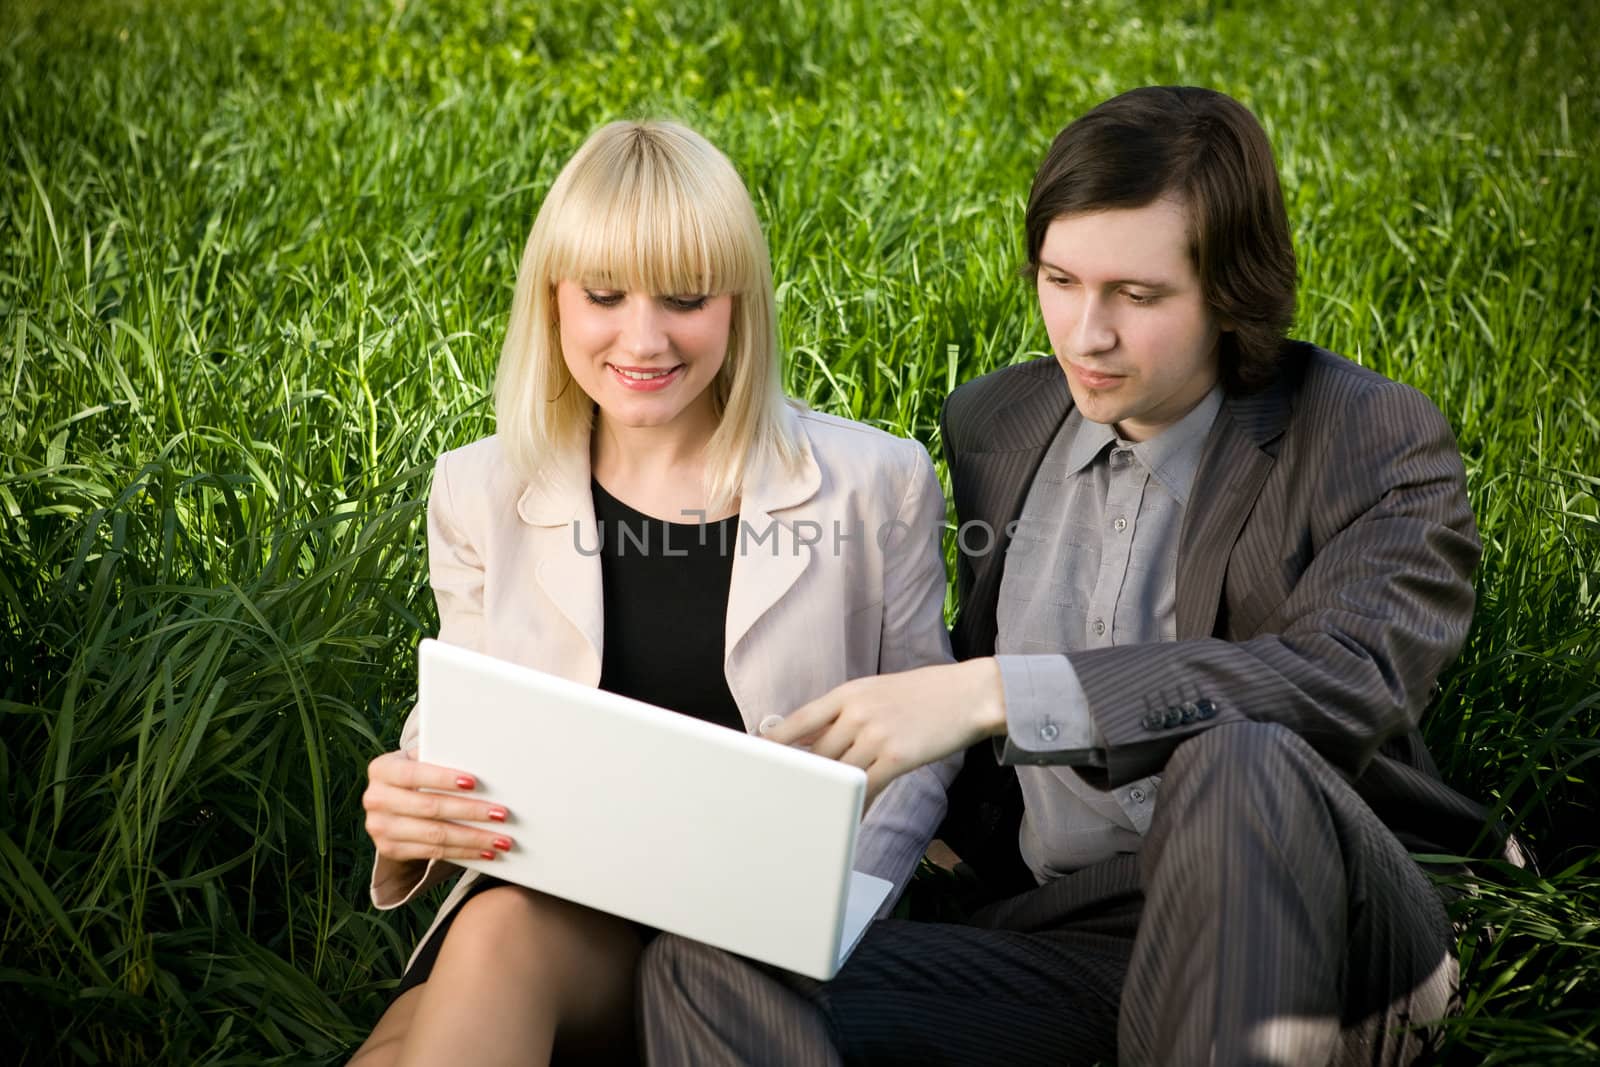 students on the grass with laptop
